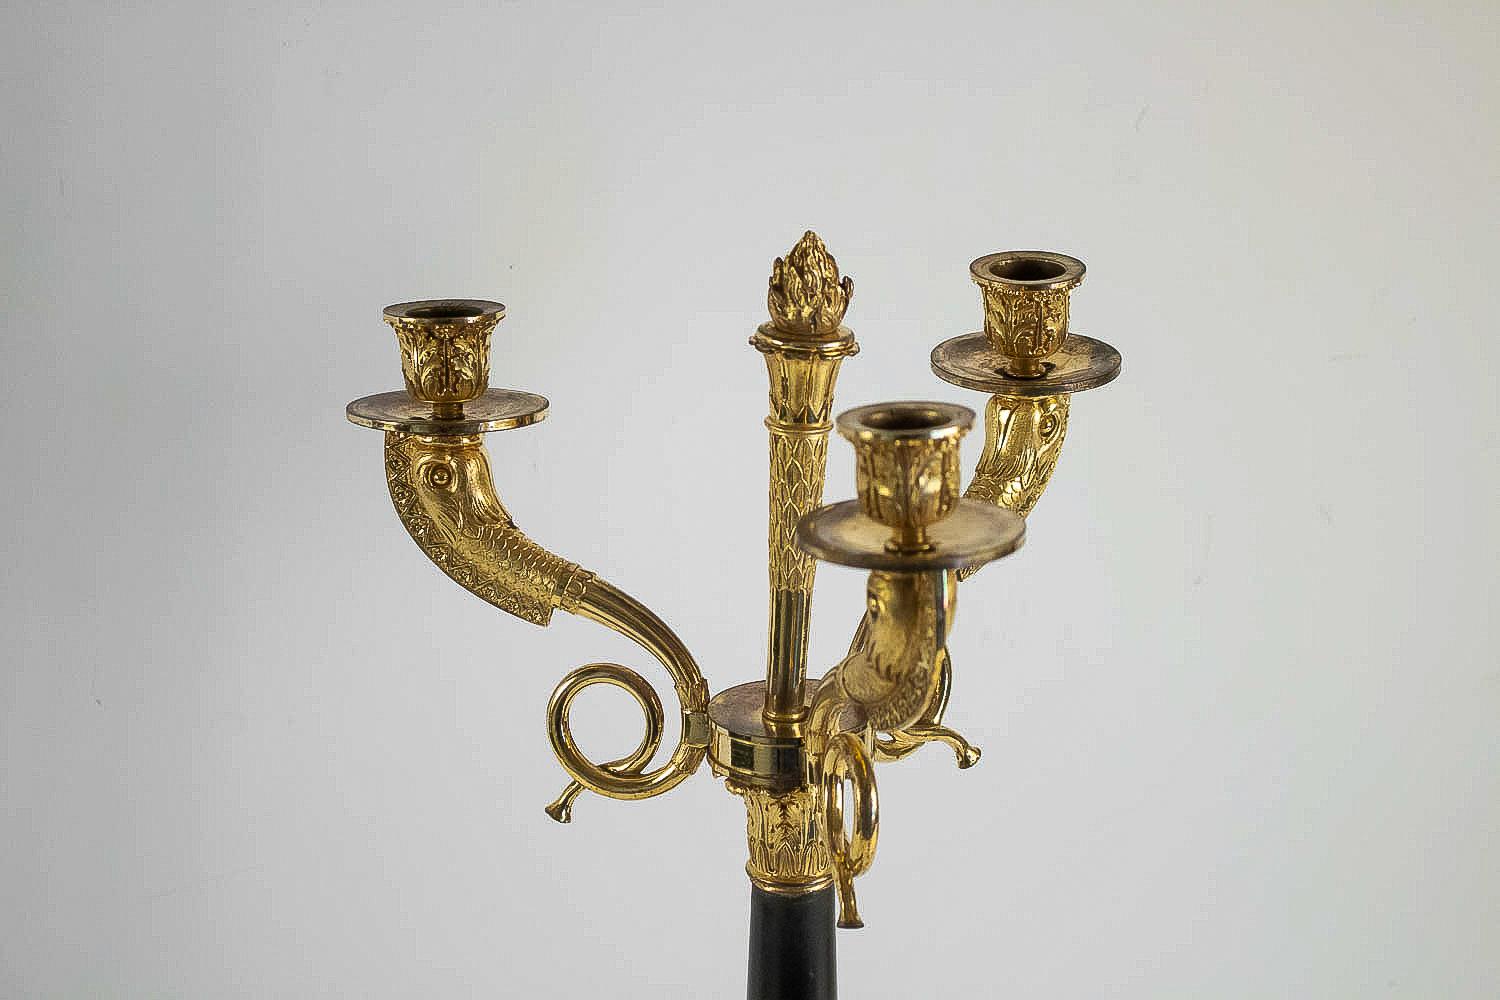 Large Pair of French Empire or Restauration Period Candelabra, circa 1815-1830 For Sale 1